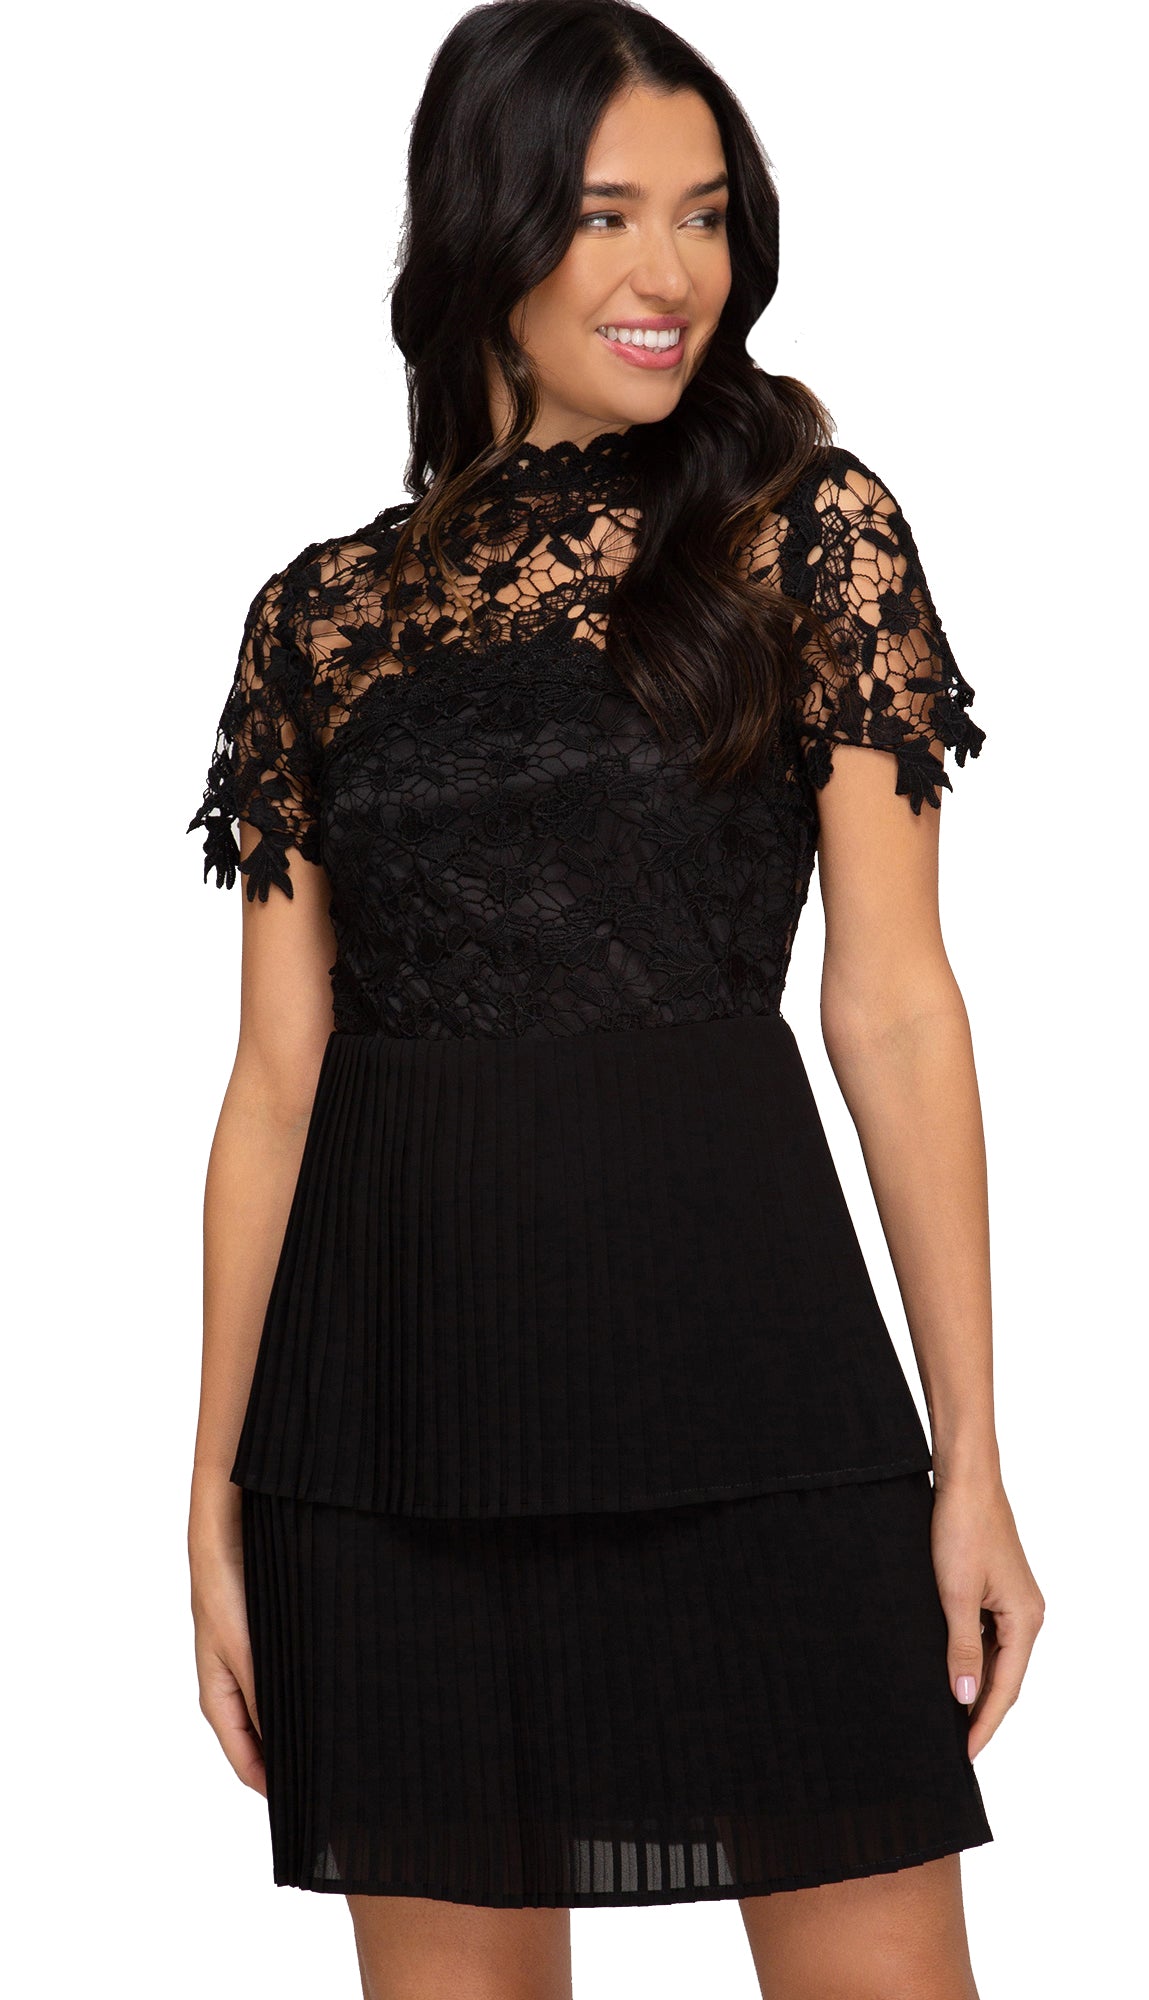 Dark Whispers Laced Top Dress- Black